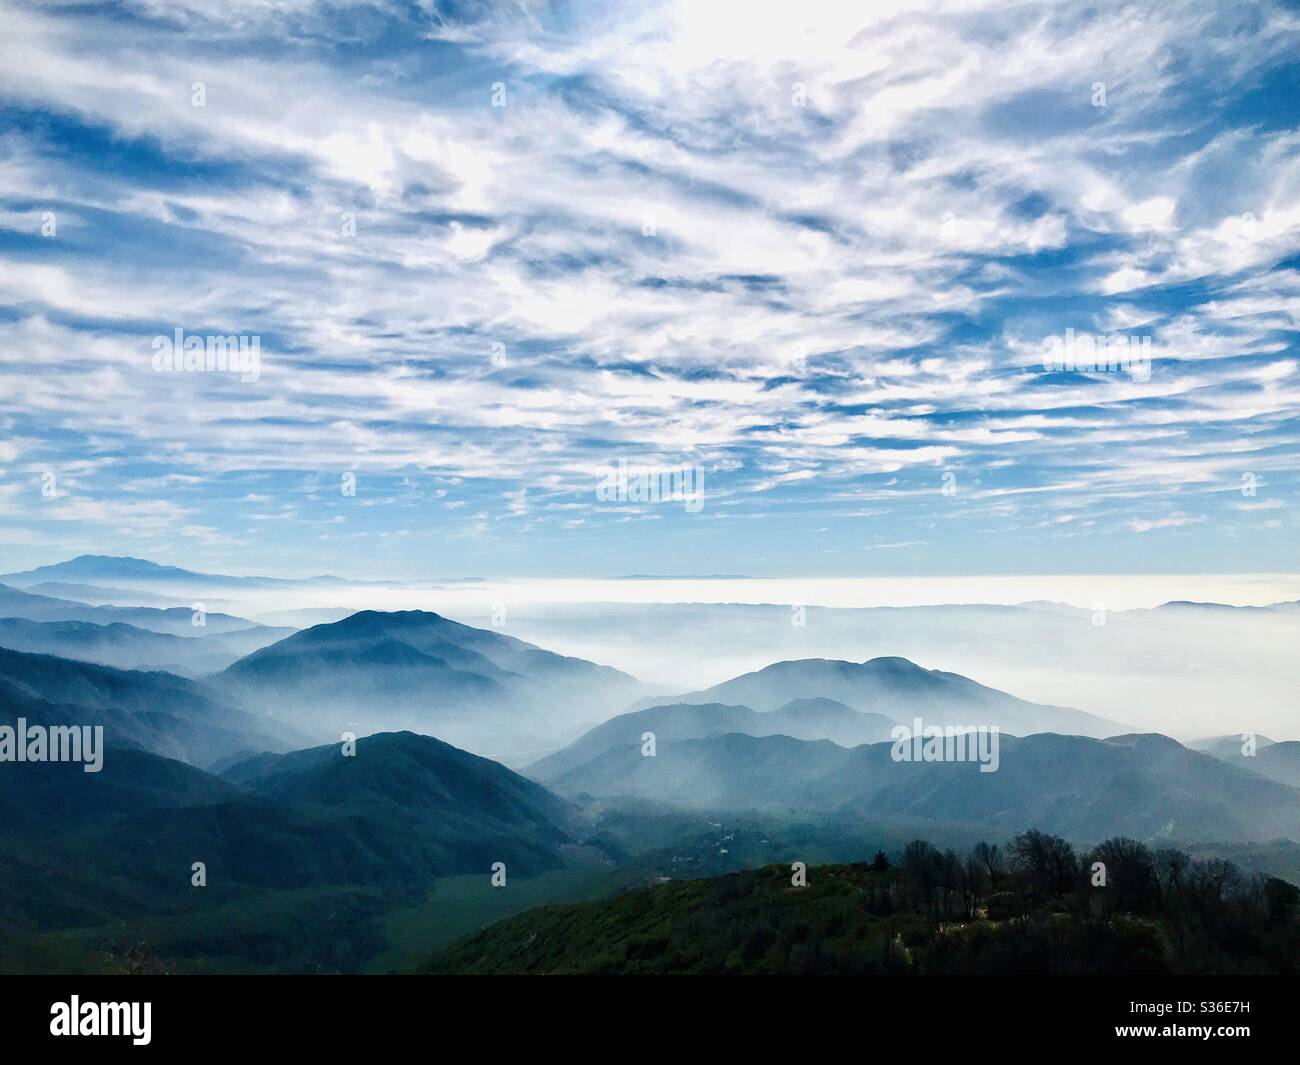 A cloud filled blue sky looms over layers of mountains. Stock Photo